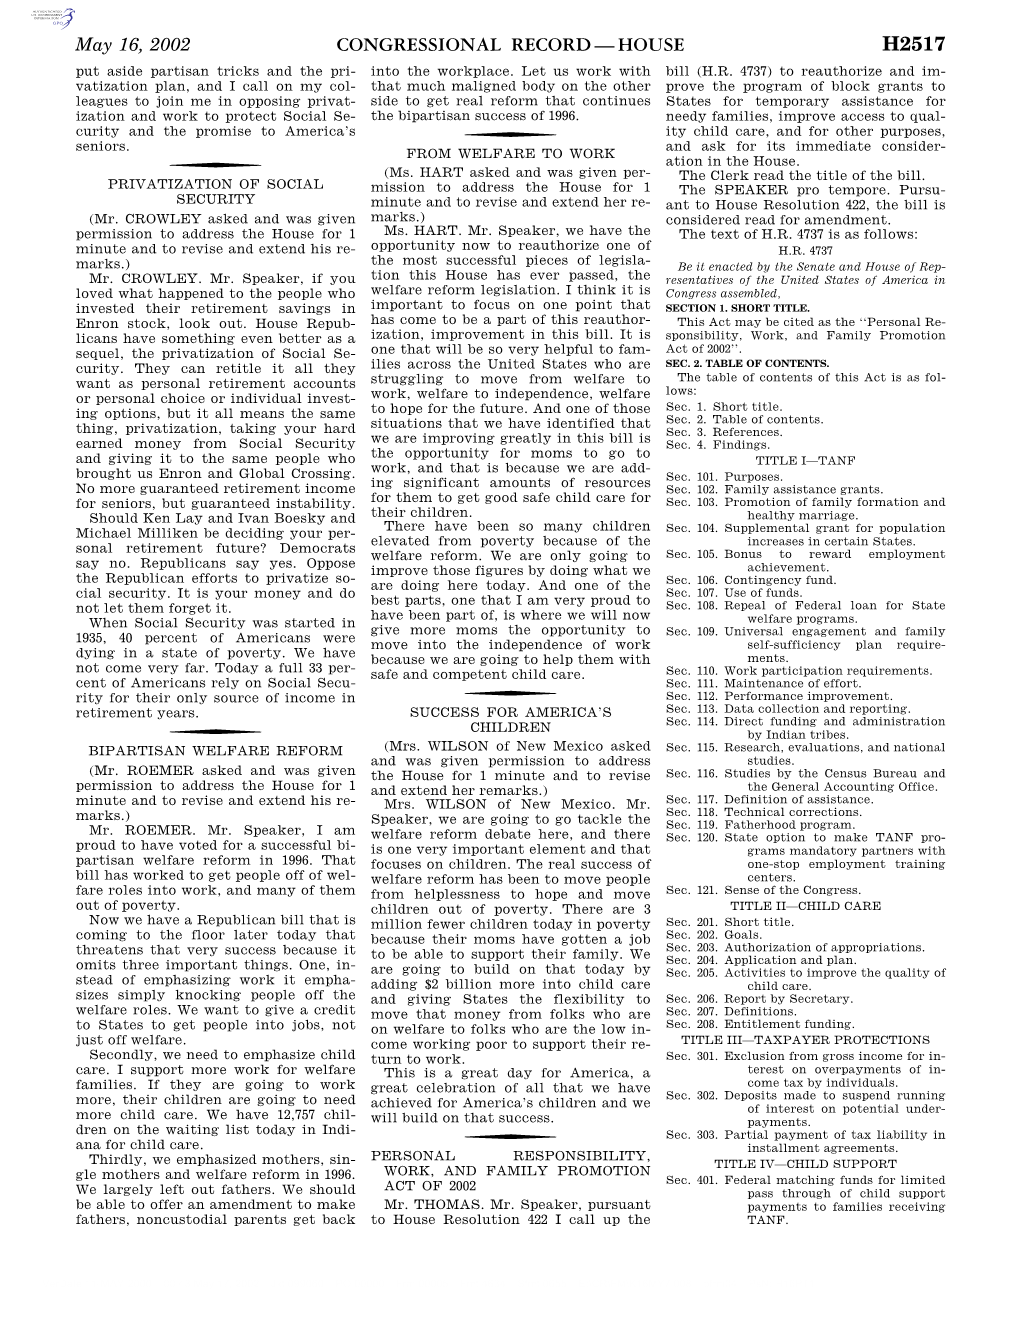 Congressional Record—House H2517